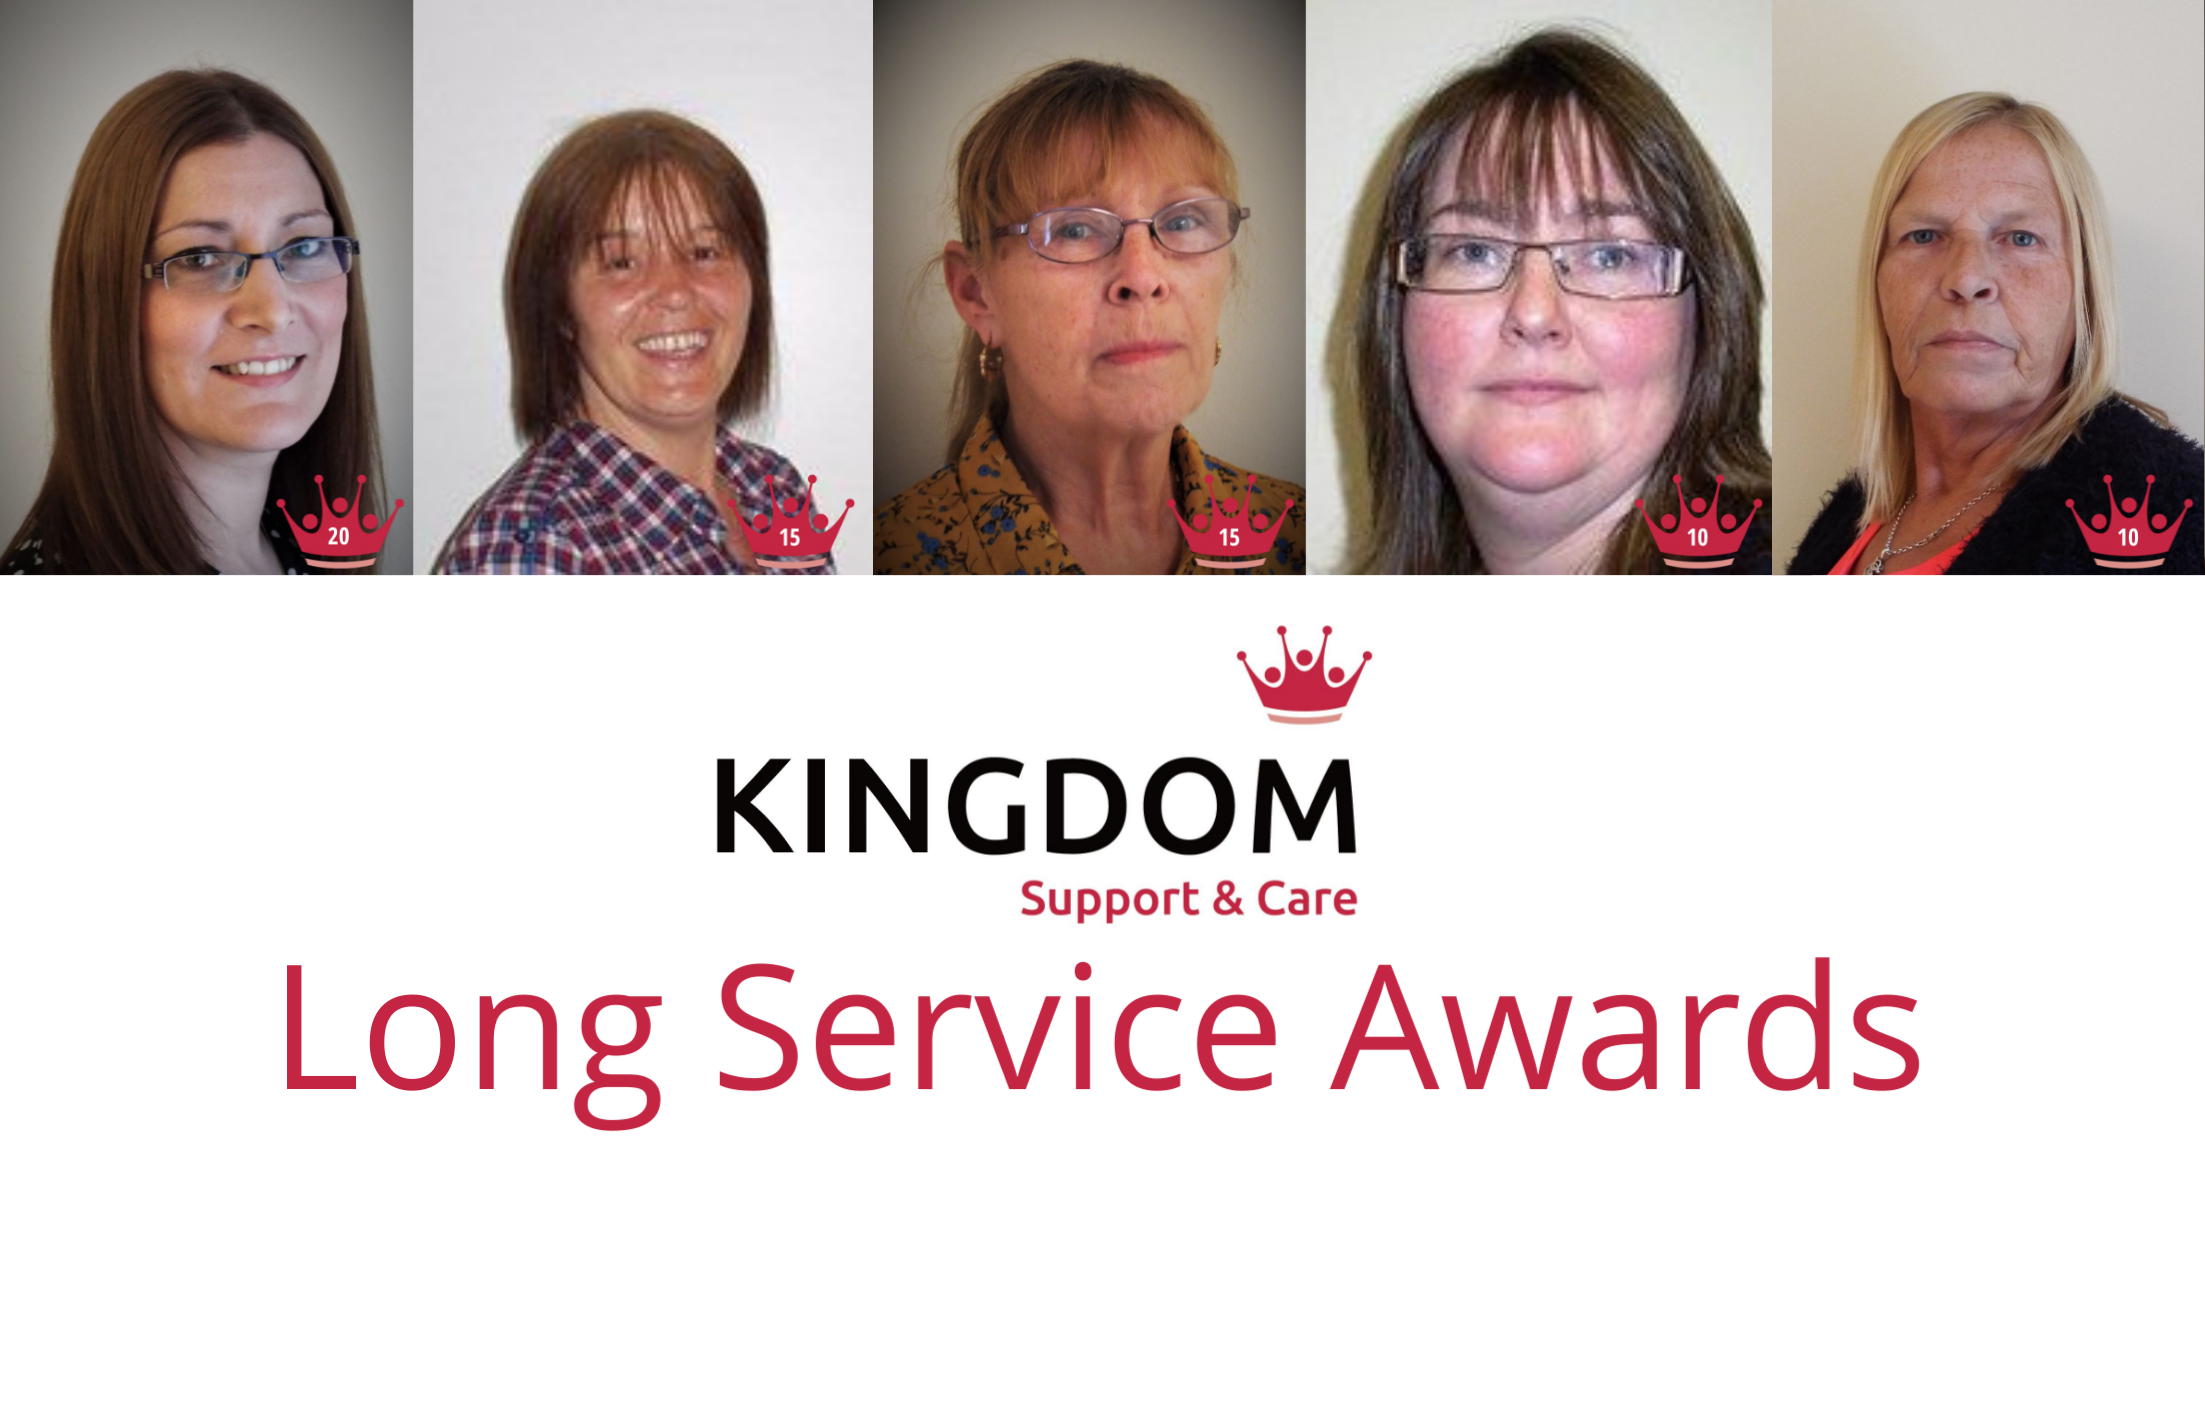 Kingdom hails long service of Support & Care staff